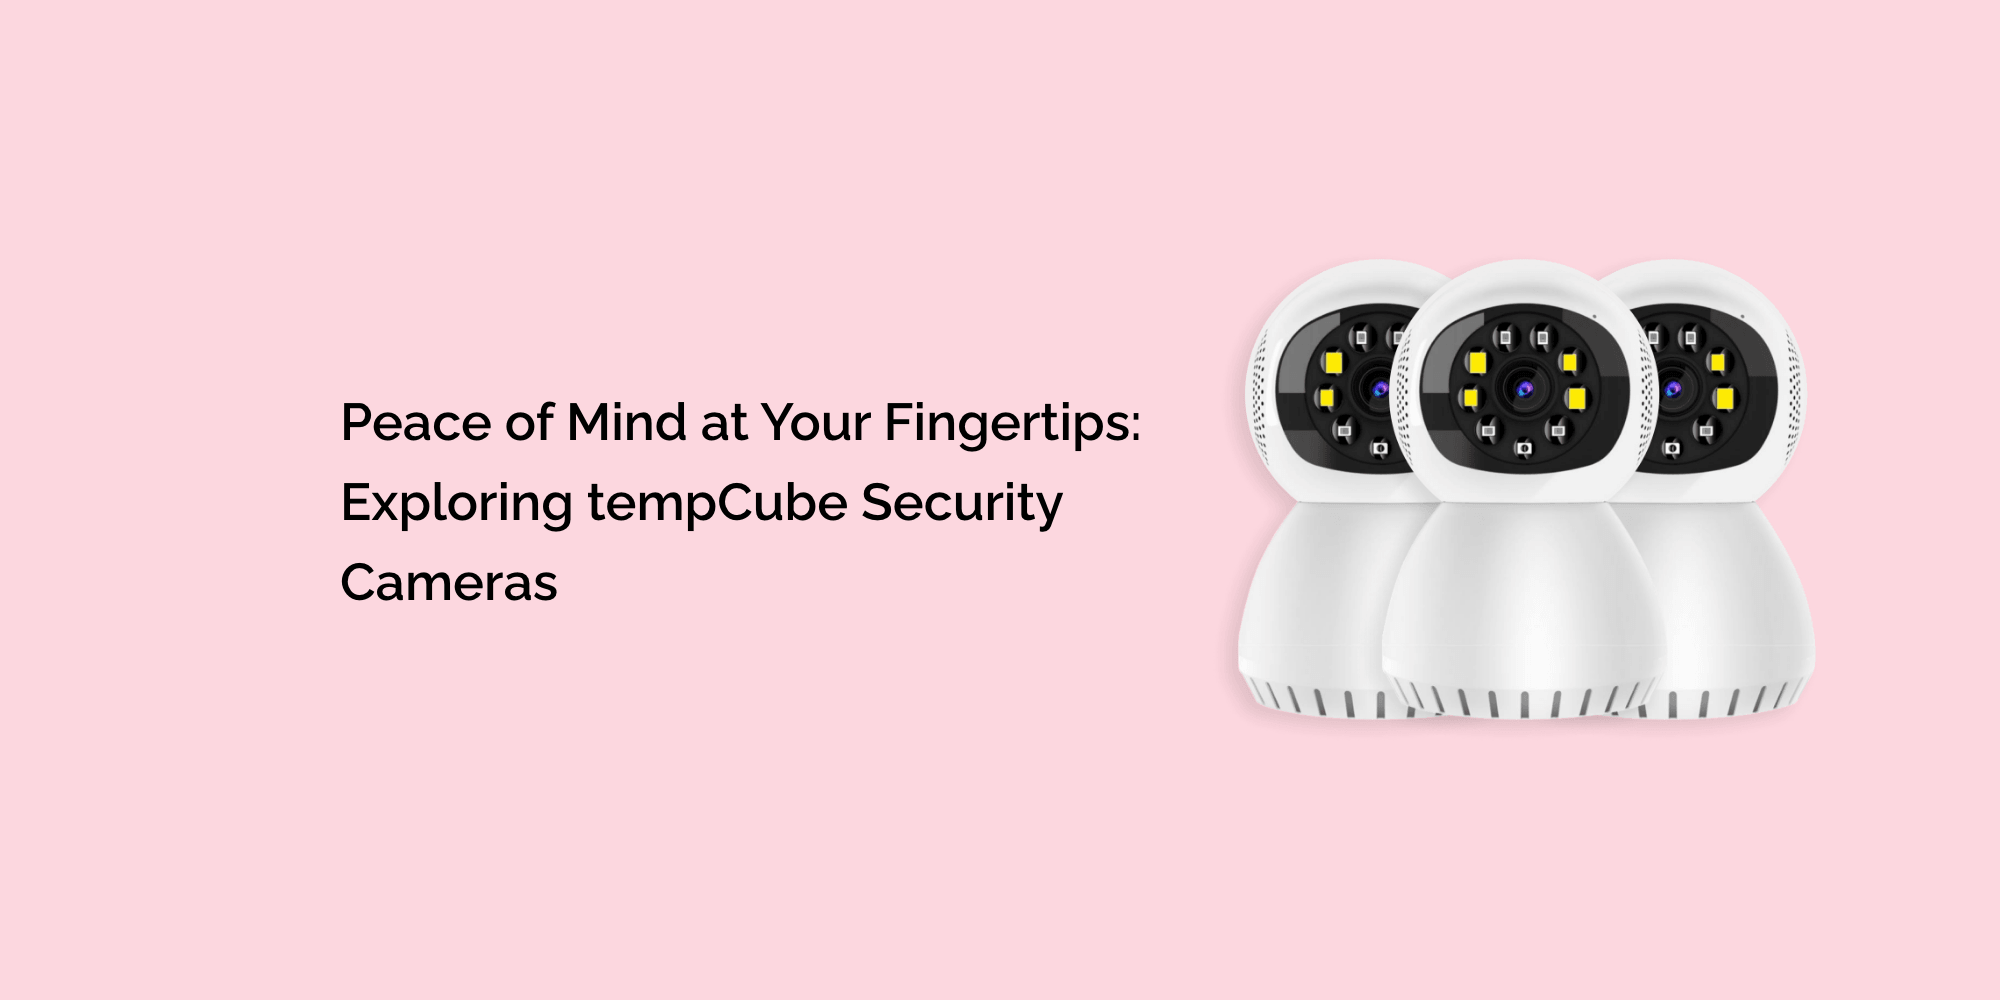 Peace of Mind at Your Fingertips: Exploring tempCube Security Cameras